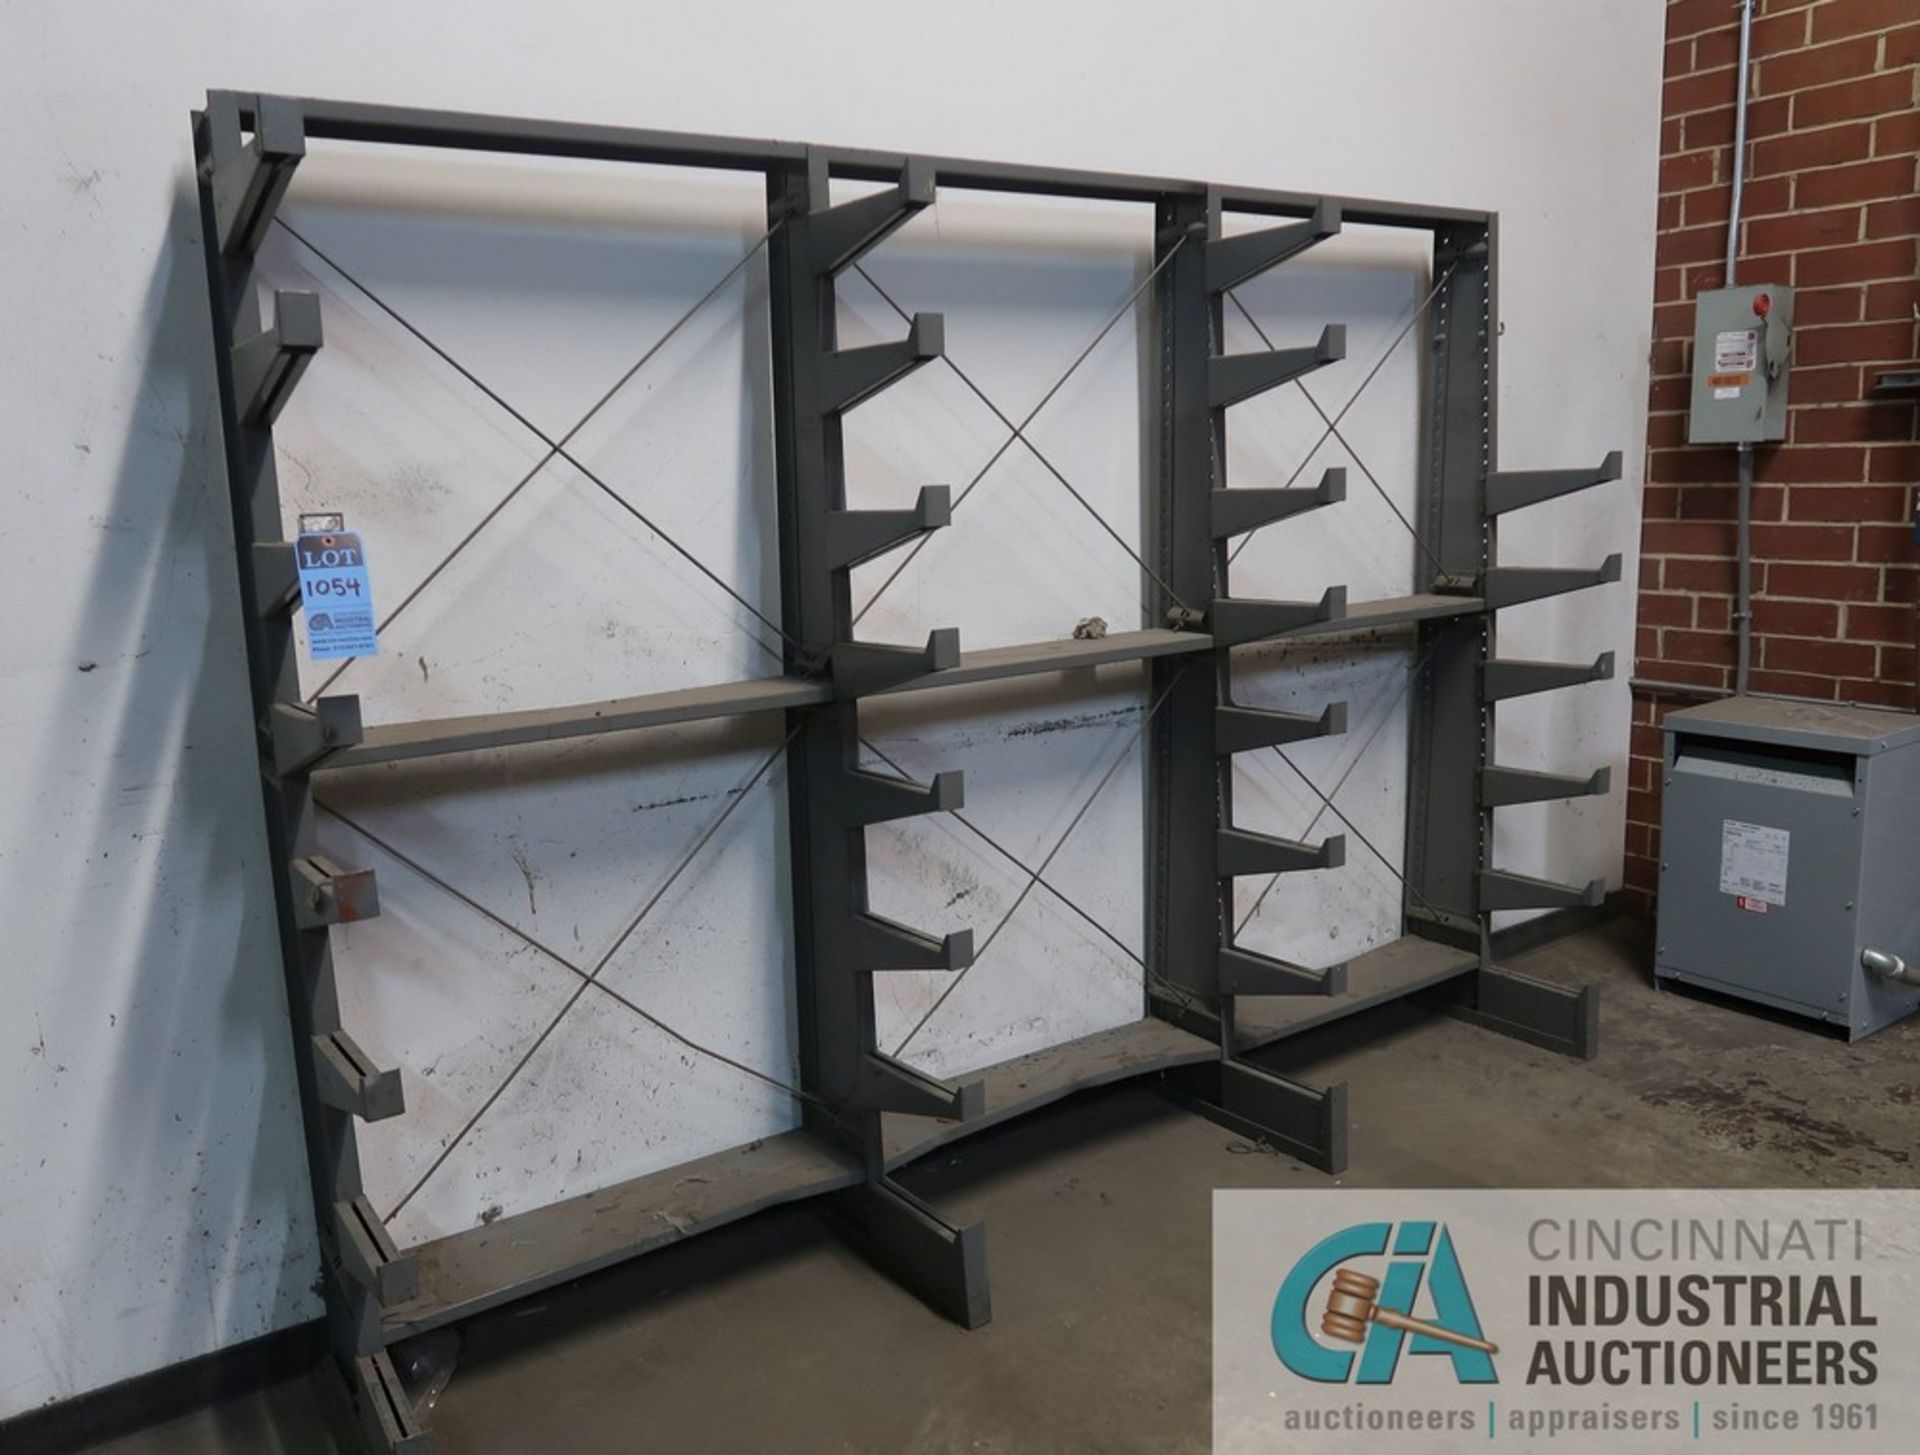 SECTION 12" ARM X 110" WIDE X 80" HIGH LYON SINGLE SIDED CANTILEVER RACK WITH (4) 80" HIGH